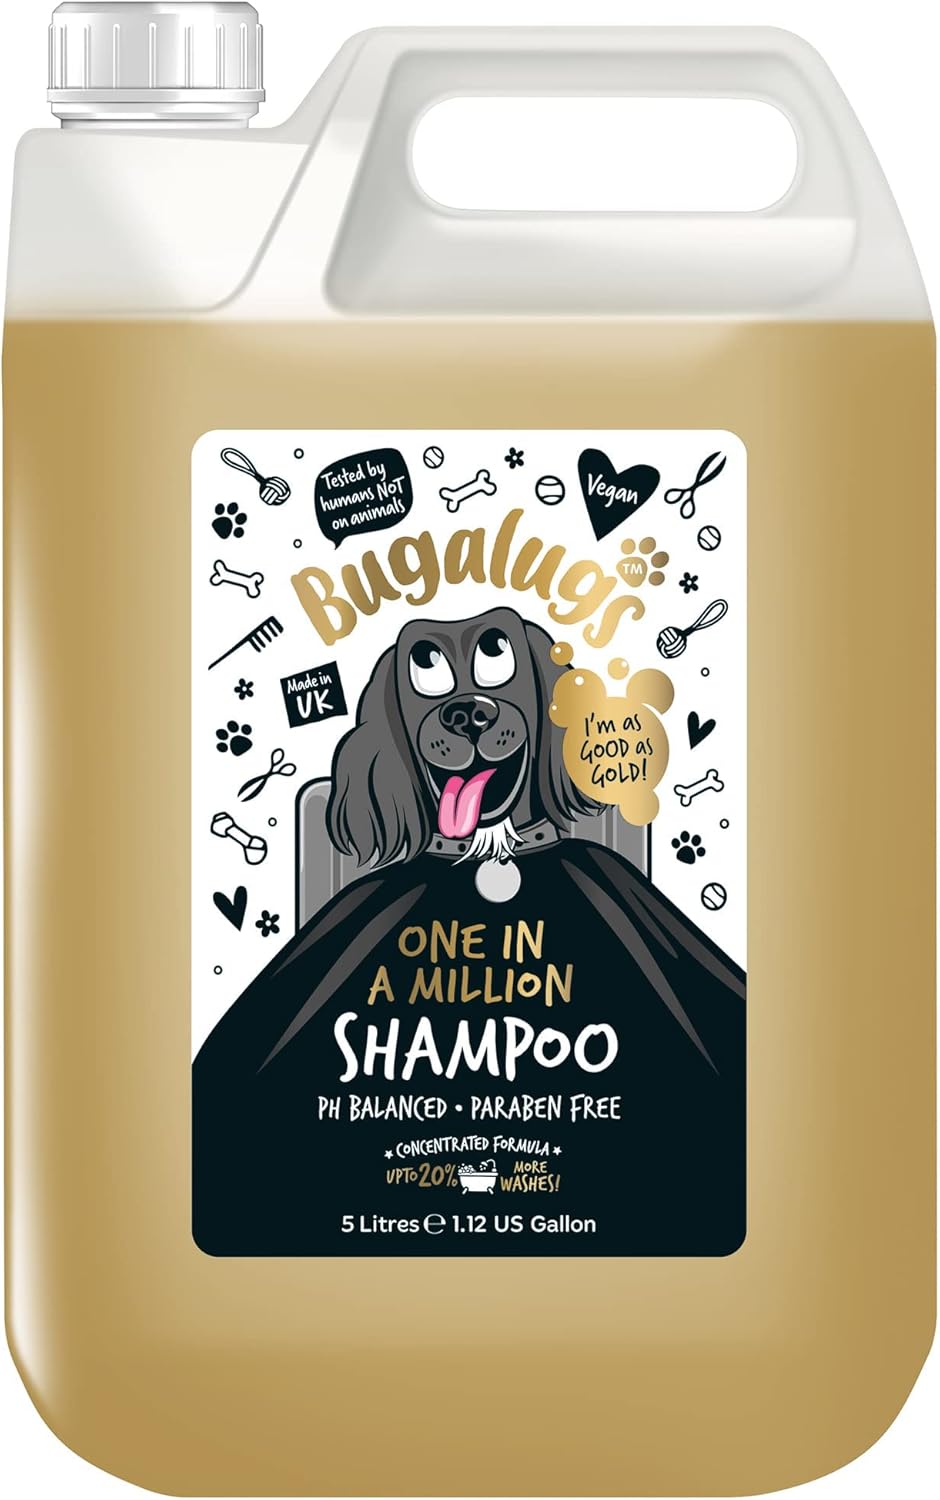 Dog Shampoo with a Distinctive One in a million Fragrance by Bugalugs - Natural dog grooming products for smelly dogs with fragrance, best puppy professional groom shampoo & conditioner (5 Litre)?Dog Shampoo